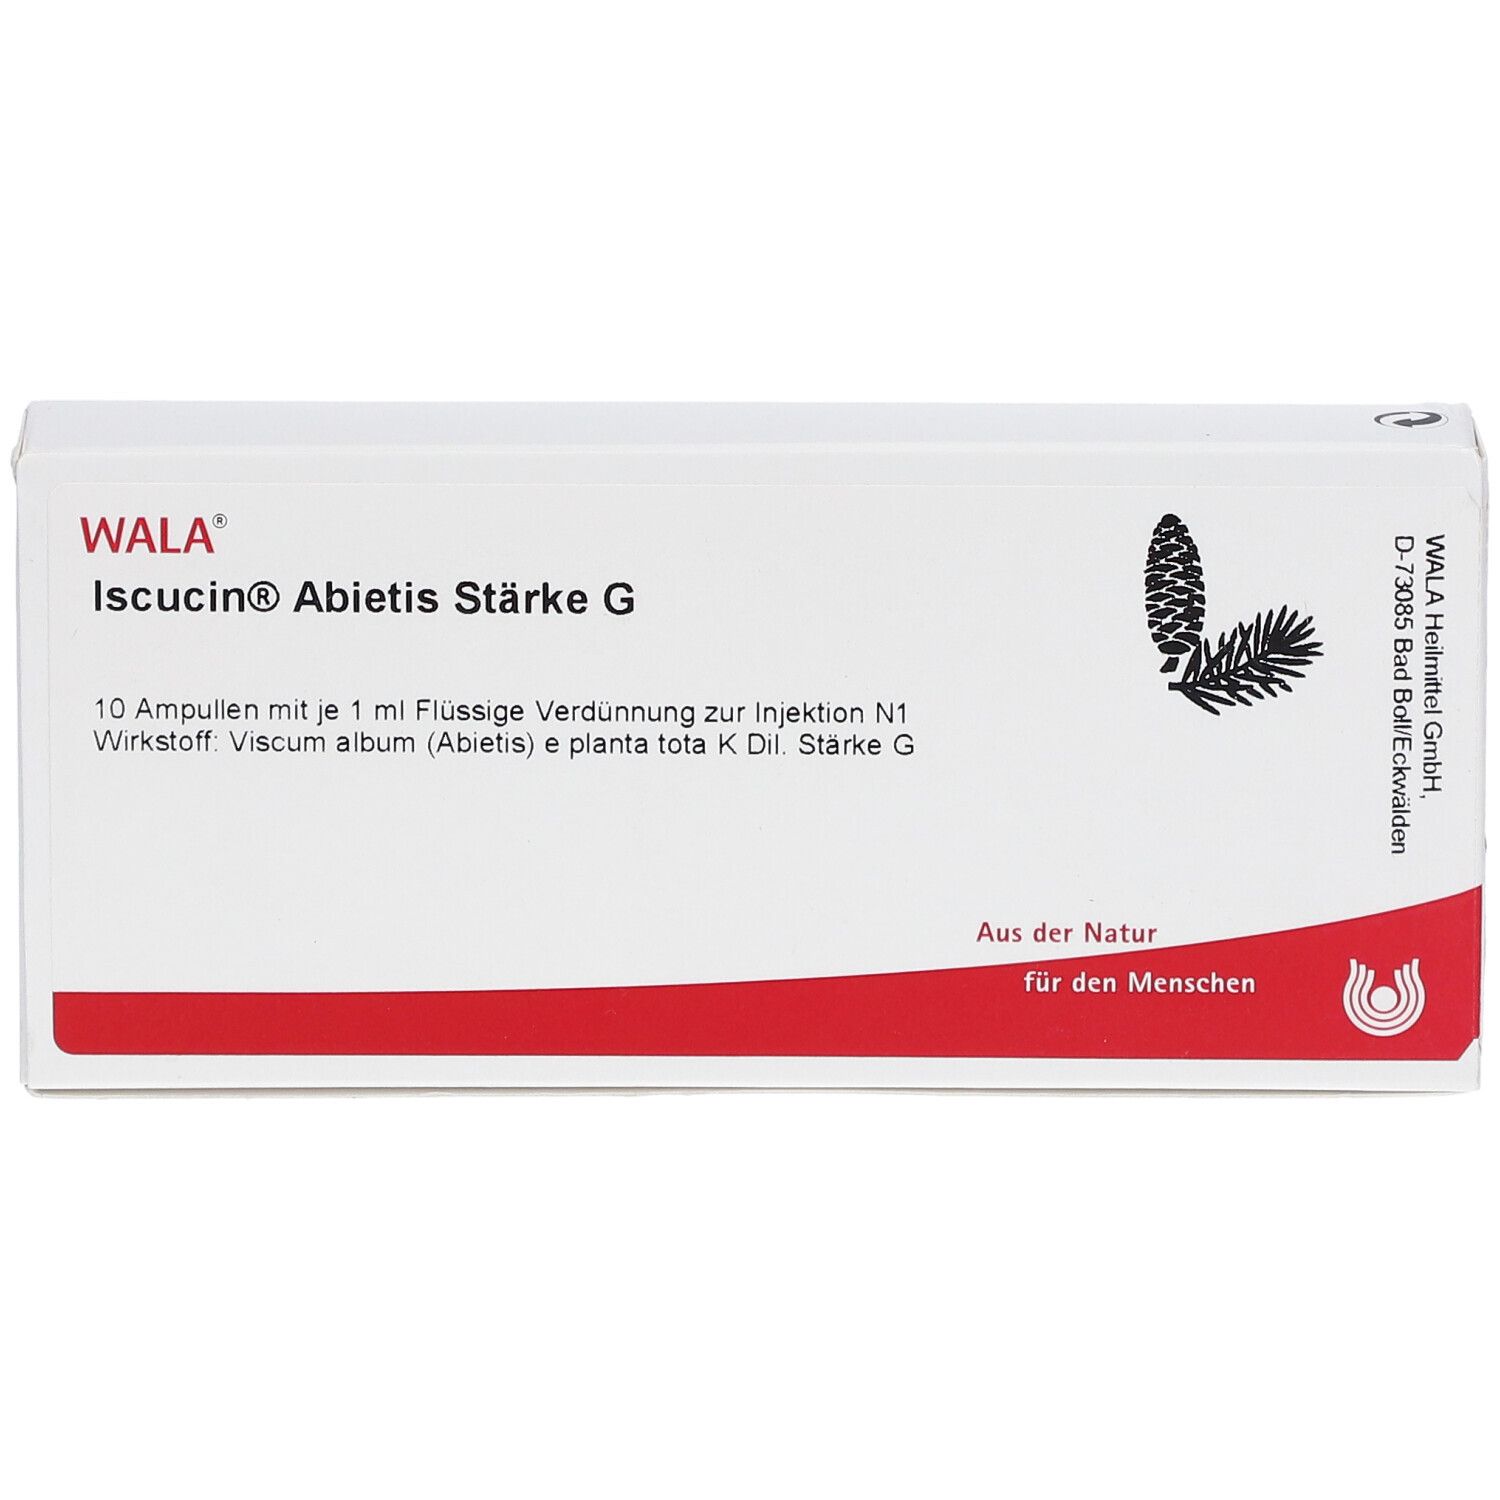 WALA® Iscucin Abietis St.G Amp.